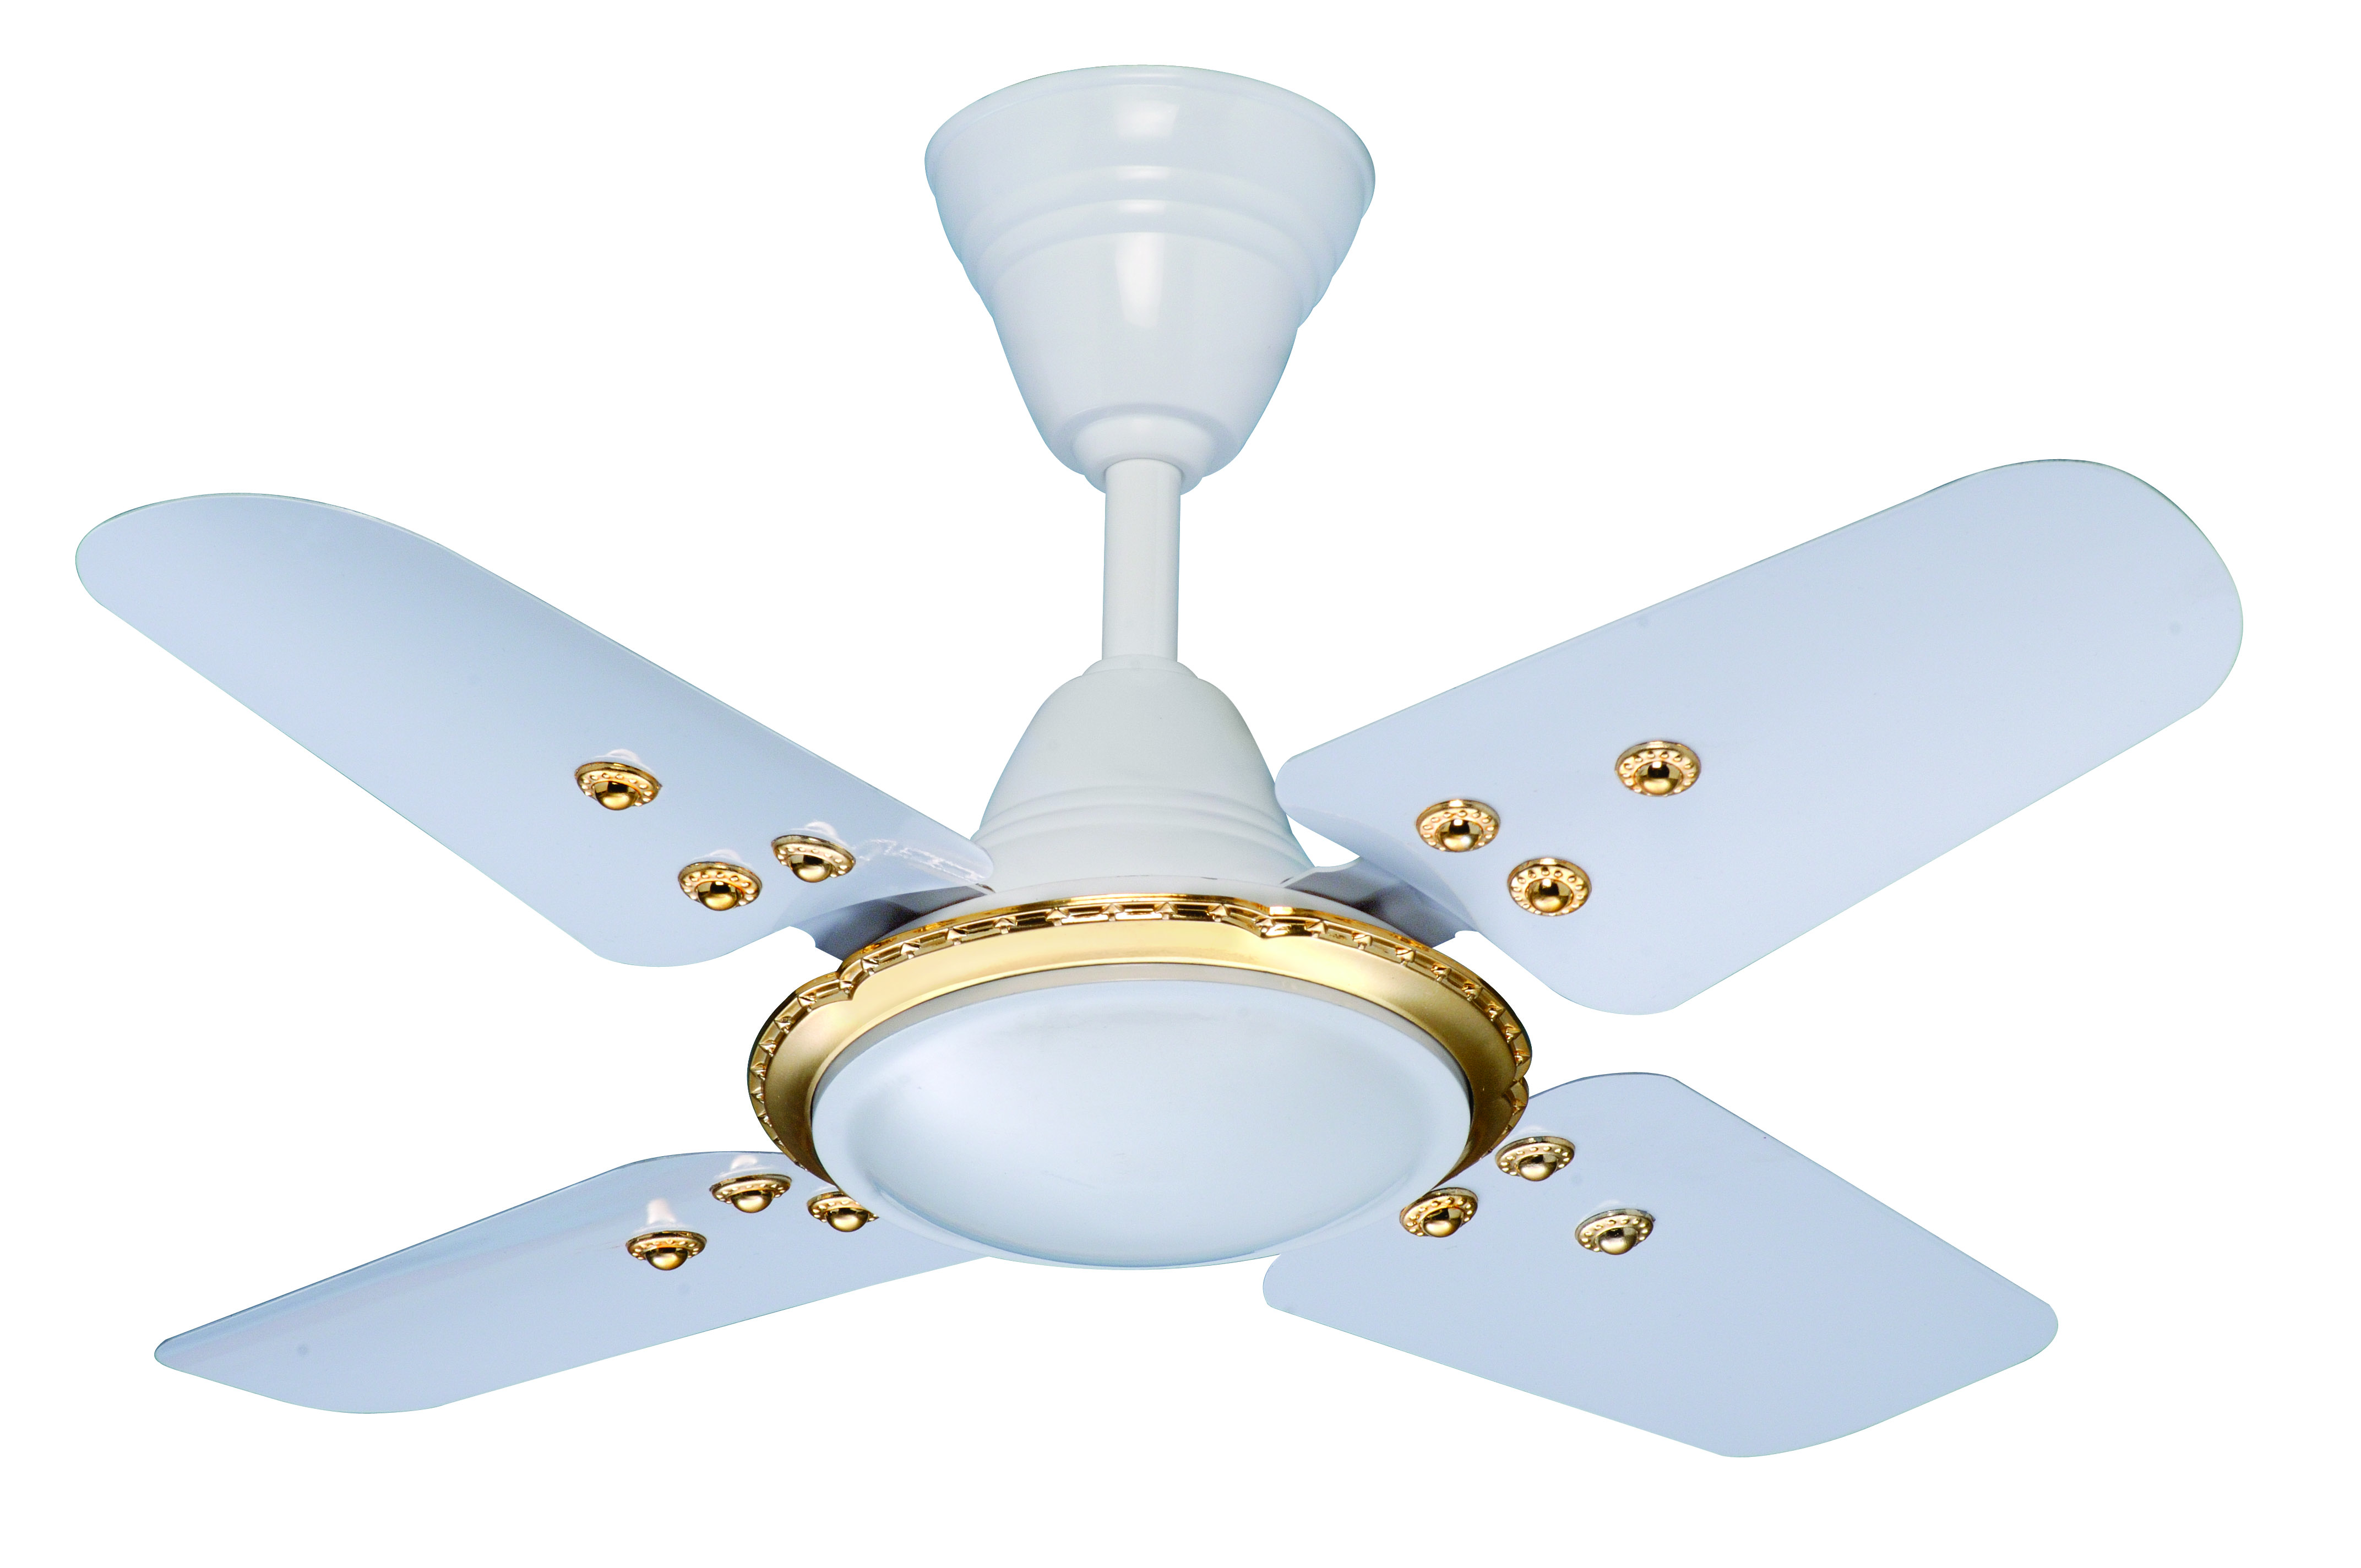 Asian style lighting and ceiling fan